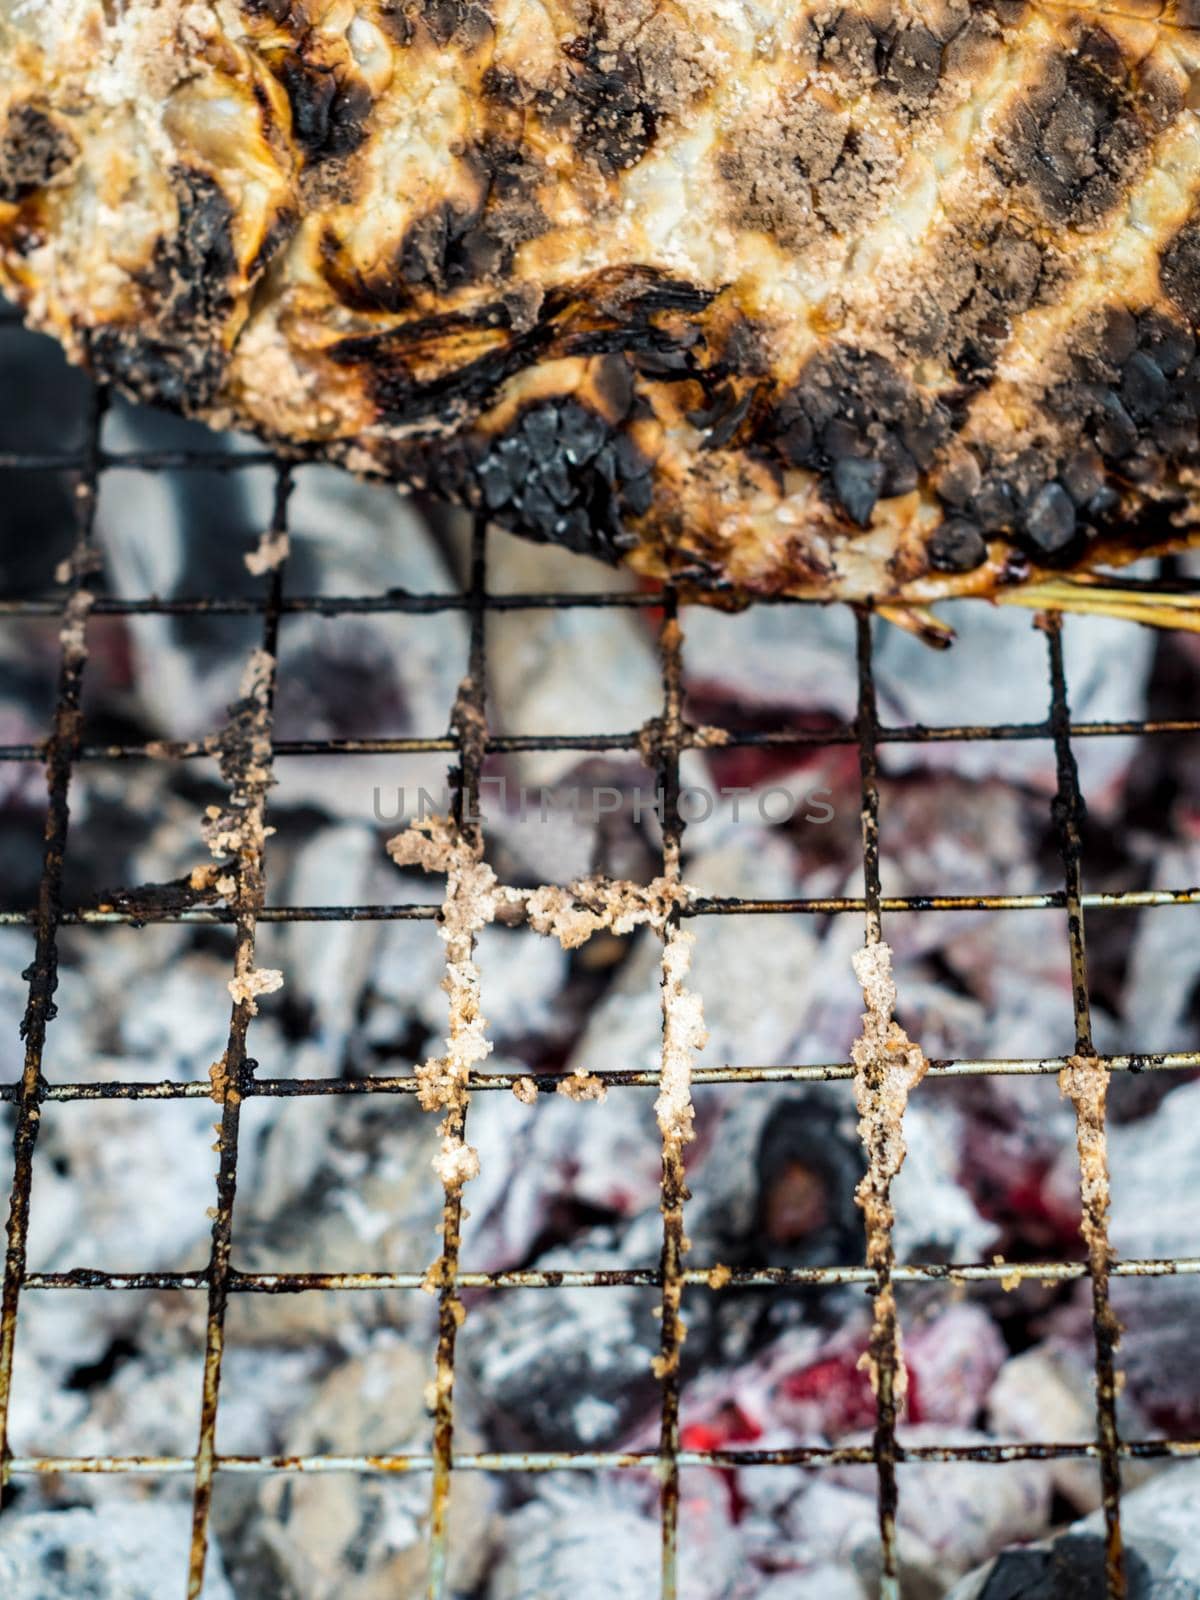 Skin of fish grilled on hot charcoal until black and scorched